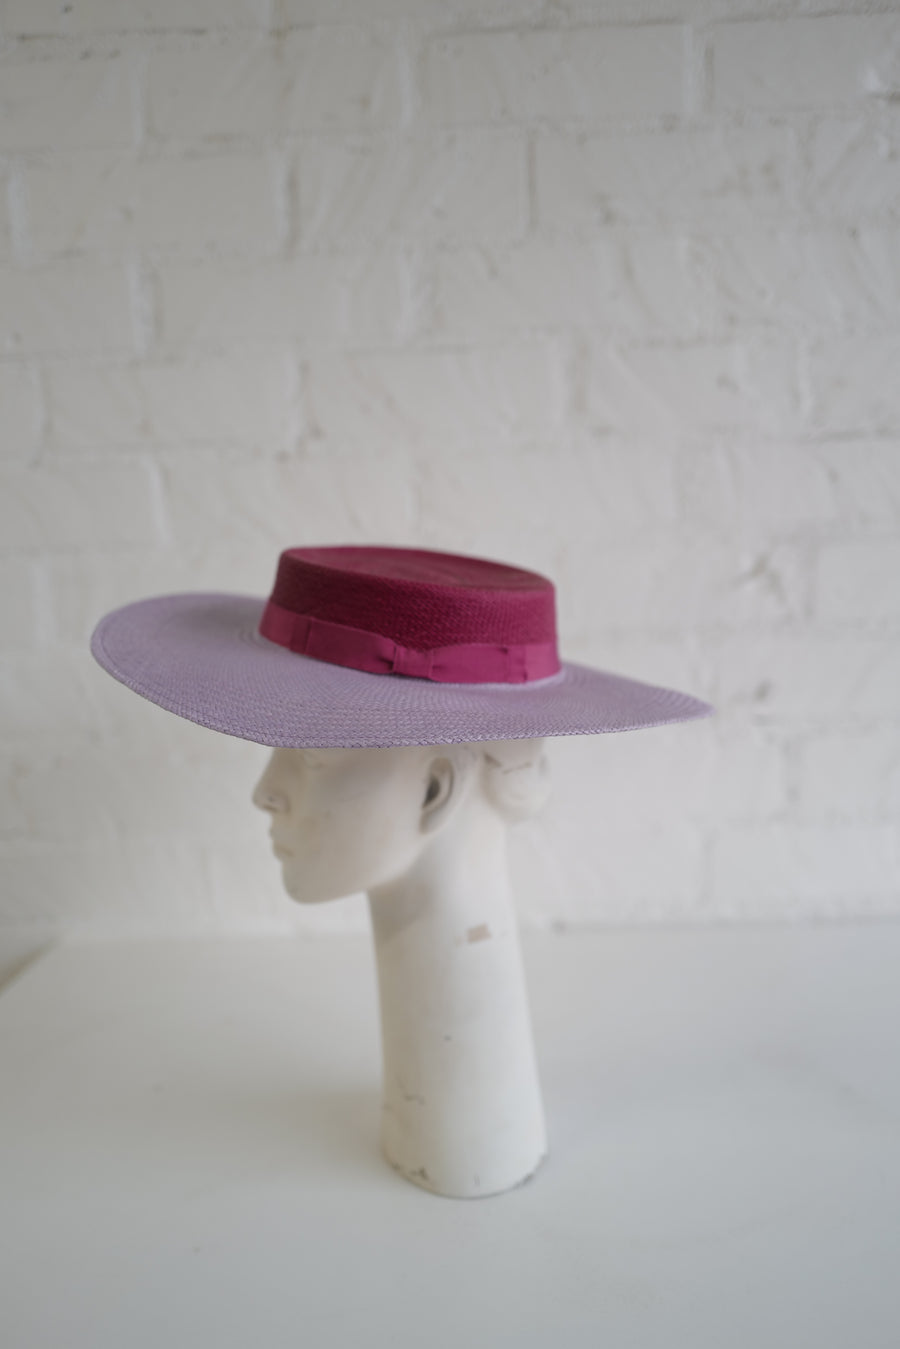 Two Toned Boater WAREHOUSE SALE - Gladys Tamez Millinery